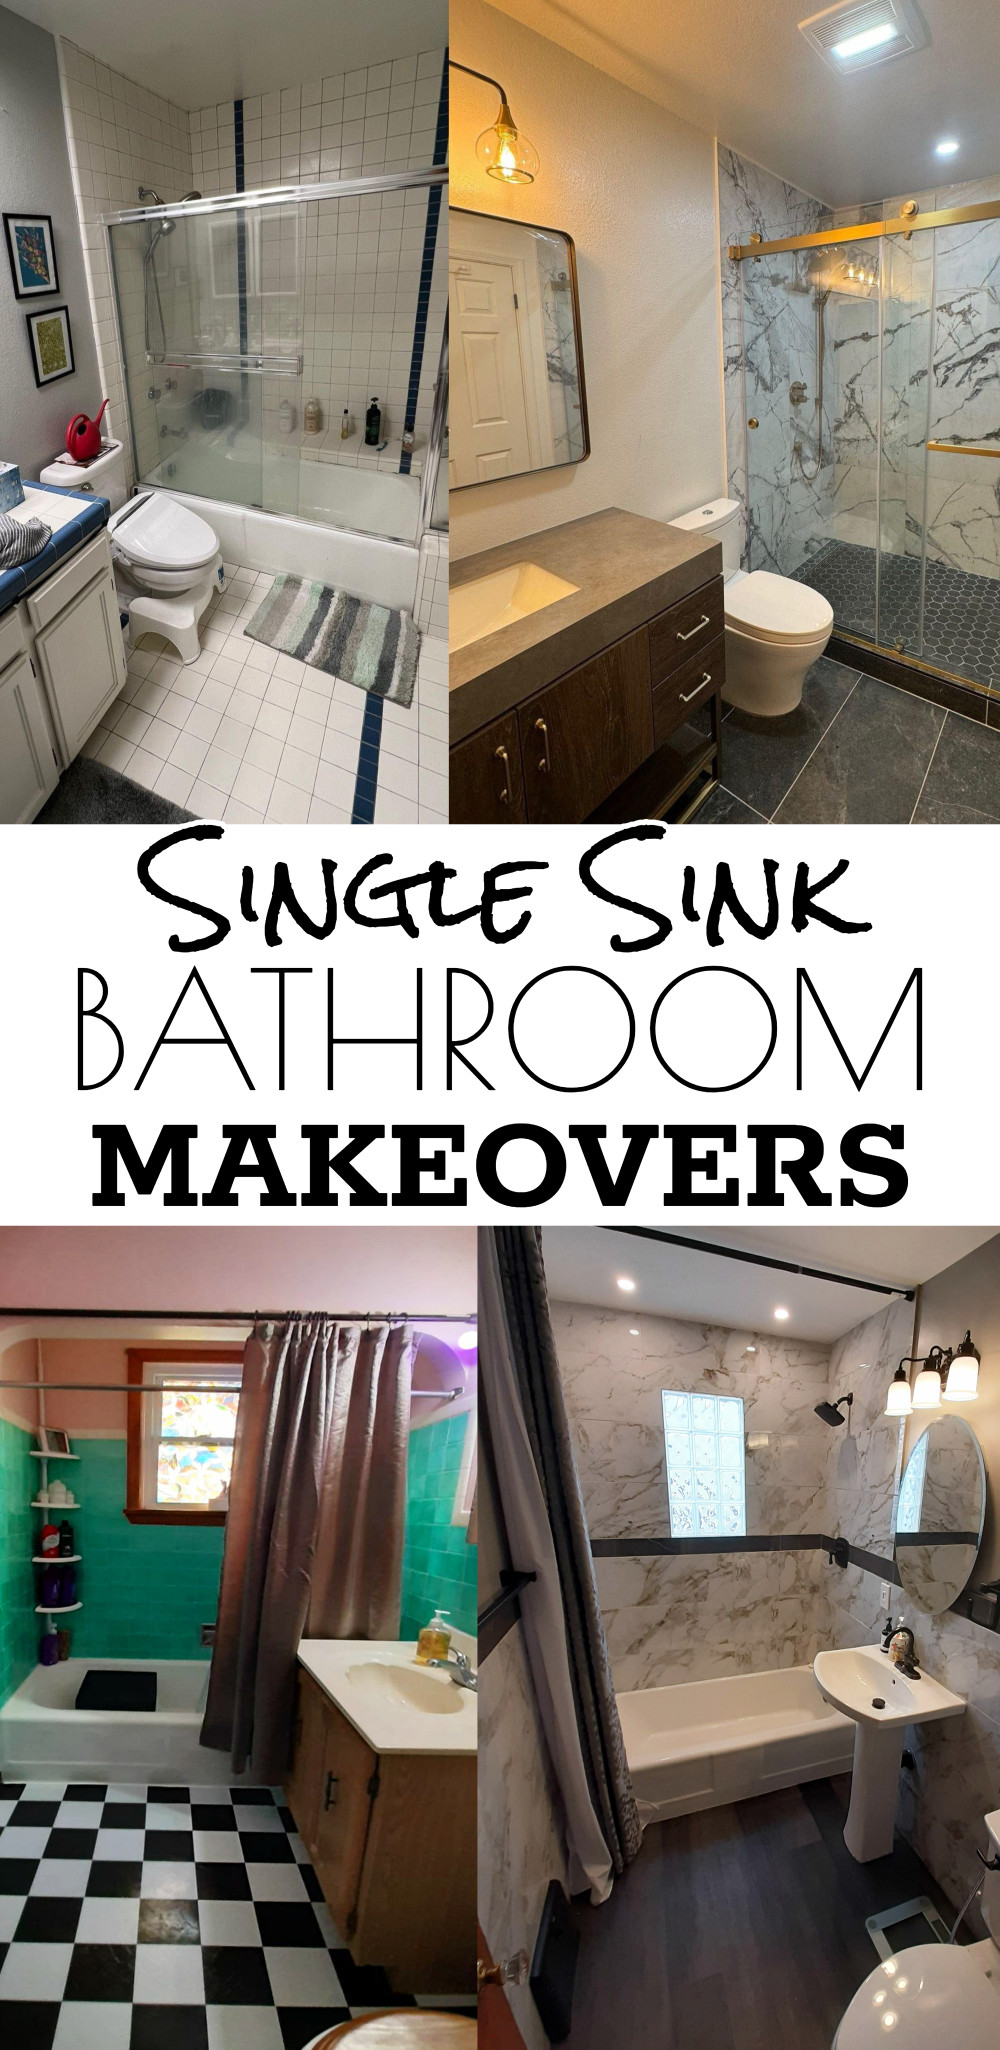 Single Sink Bathroom Makeovers Before and After Budget-Friendly Upgrades